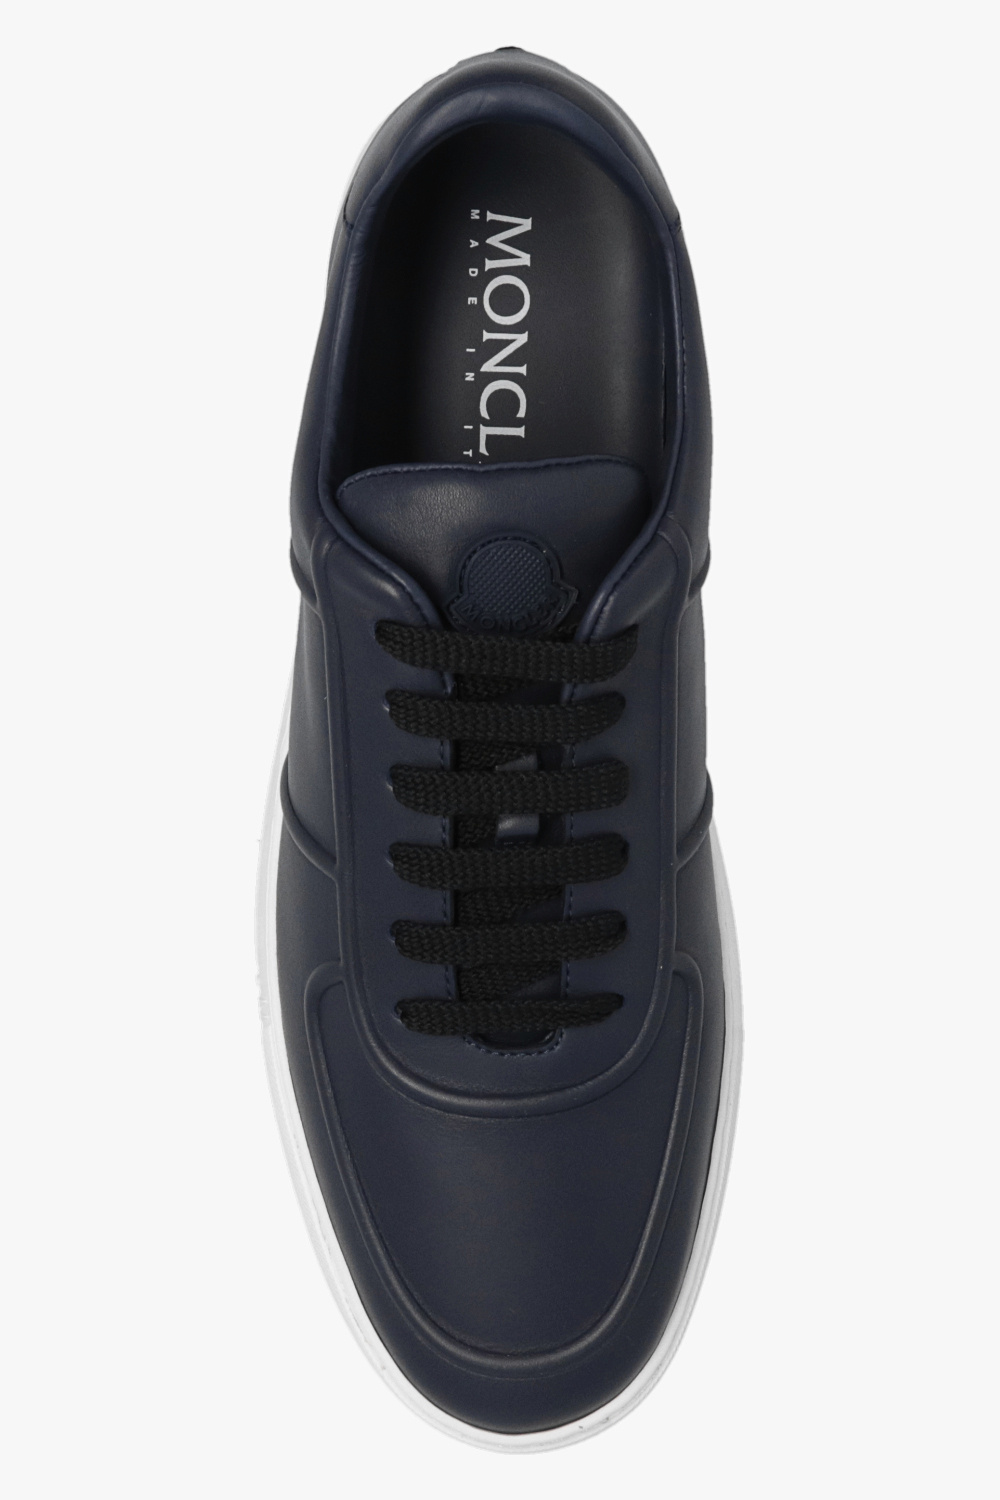 Moncler ‘New York’ sneakers